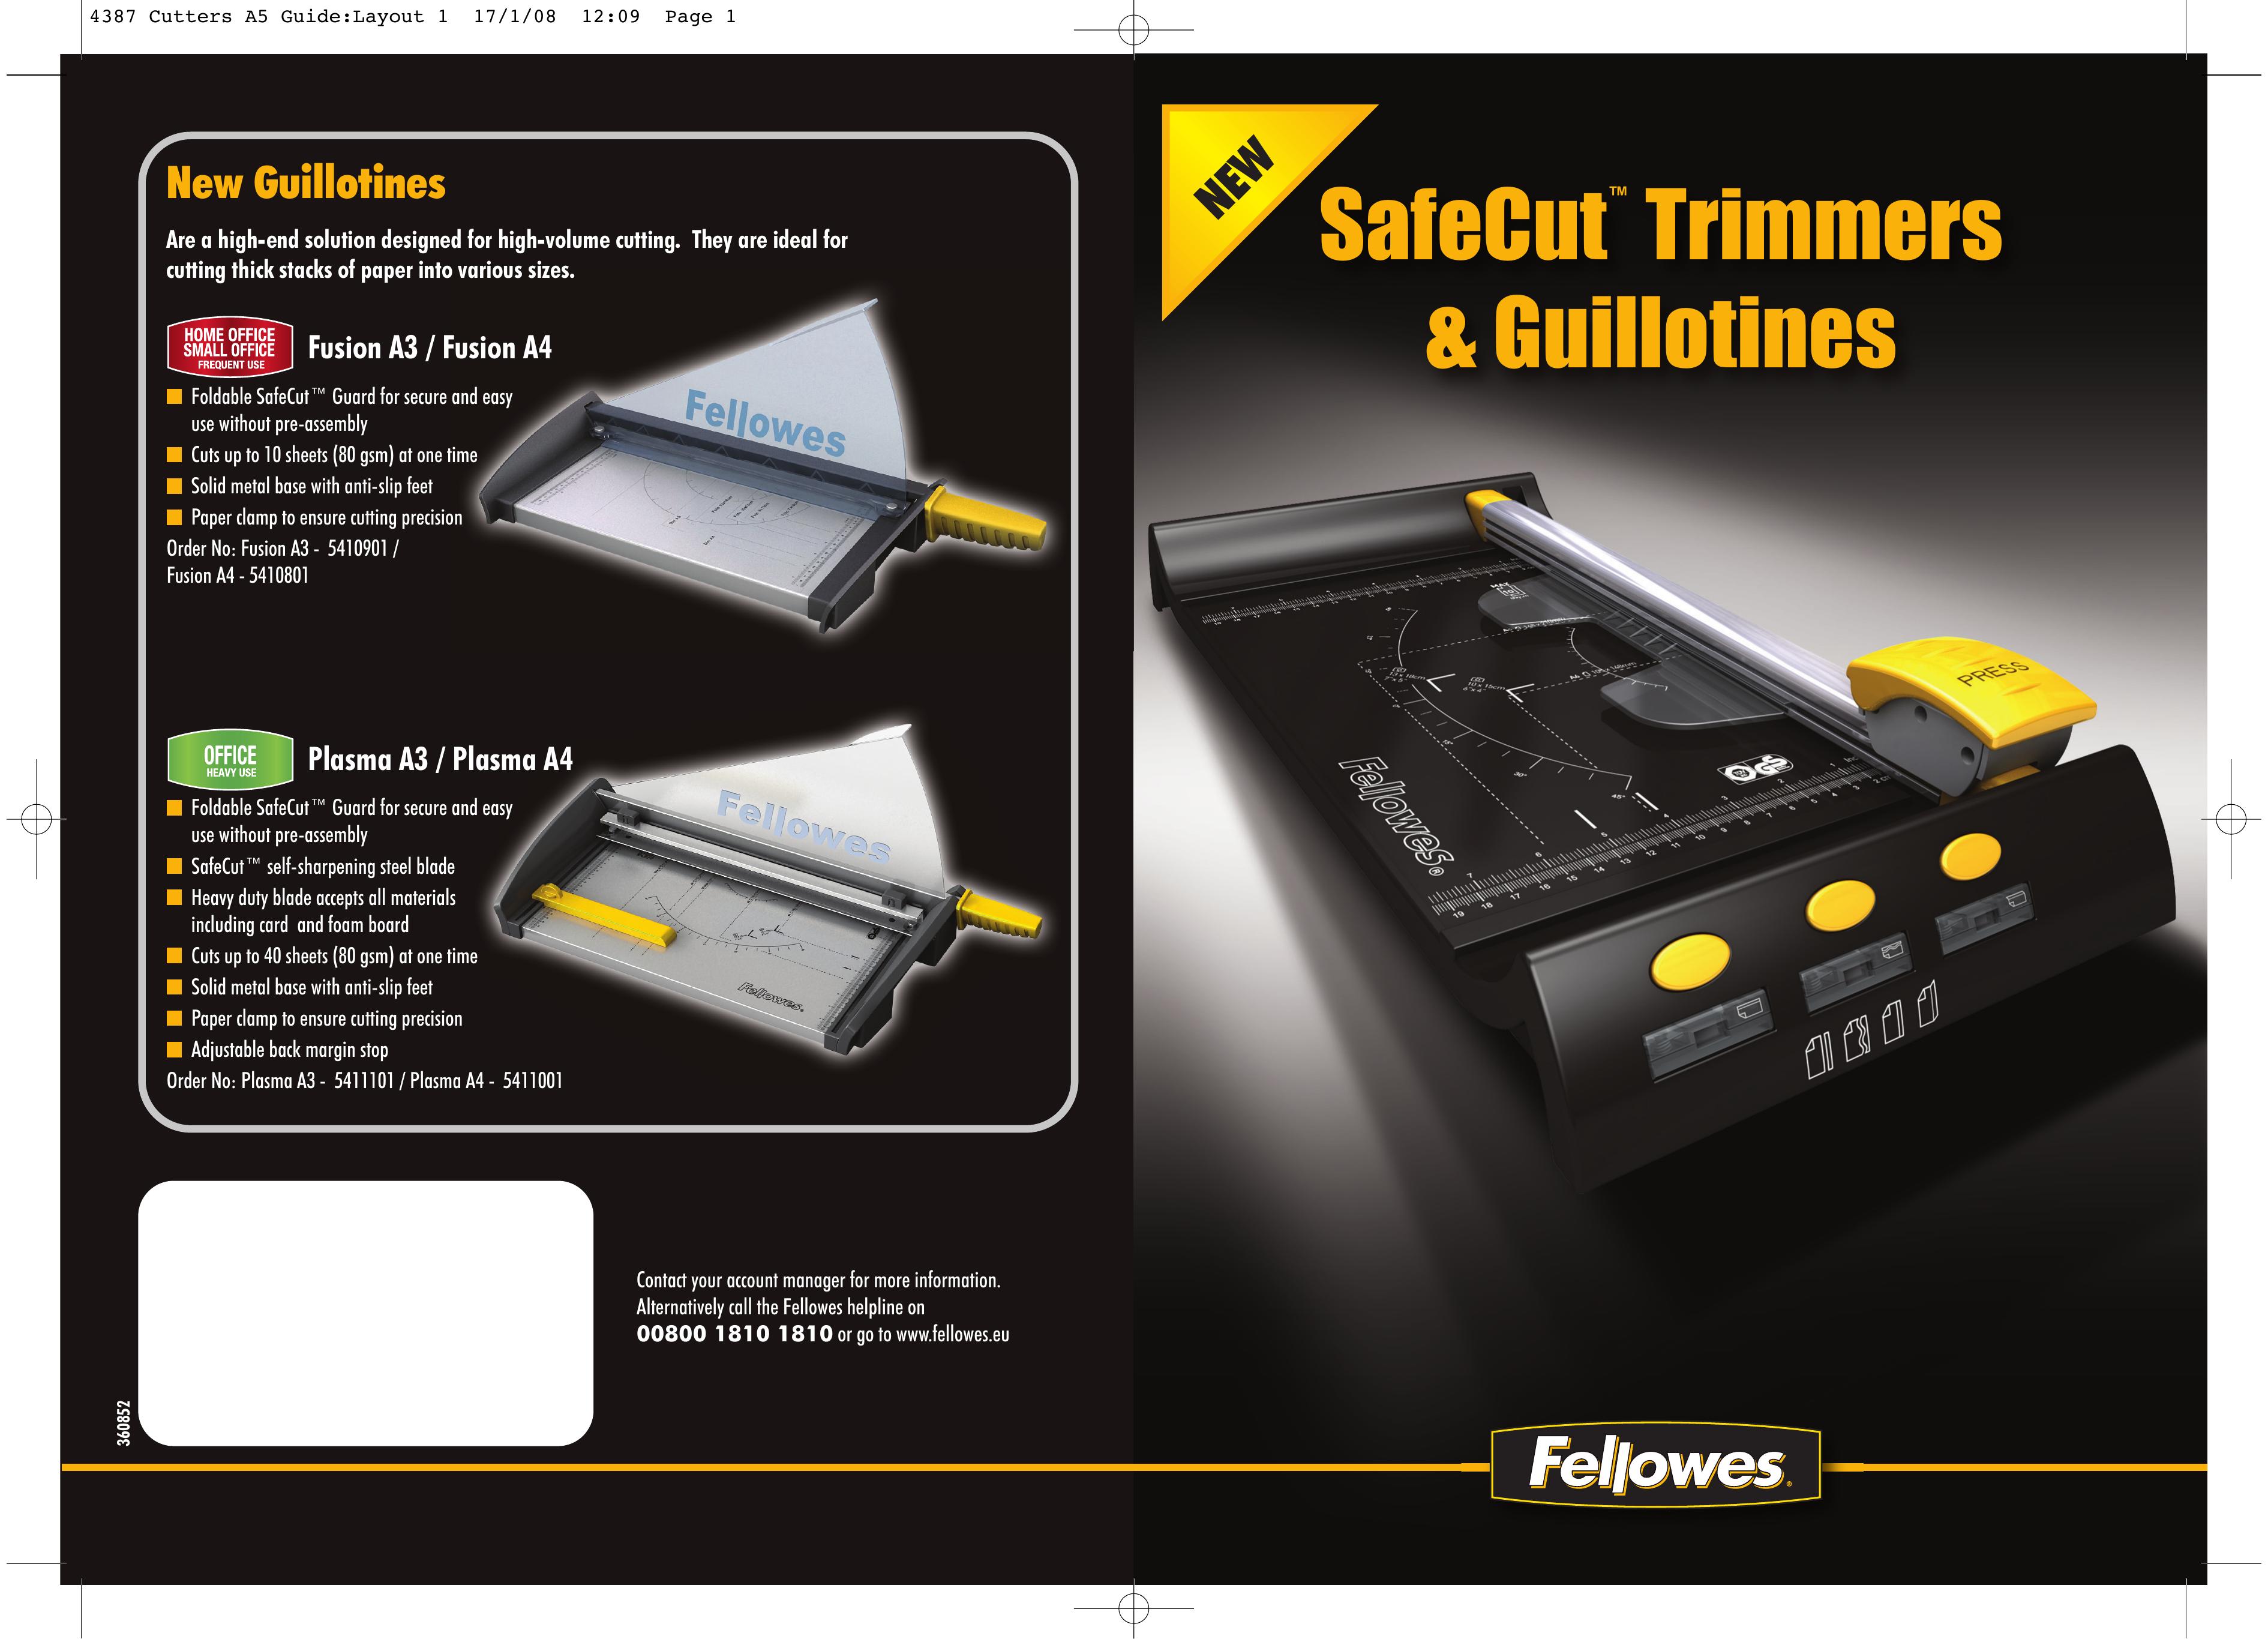 Fellowes A4 - 5411001 Trimmer User Manual